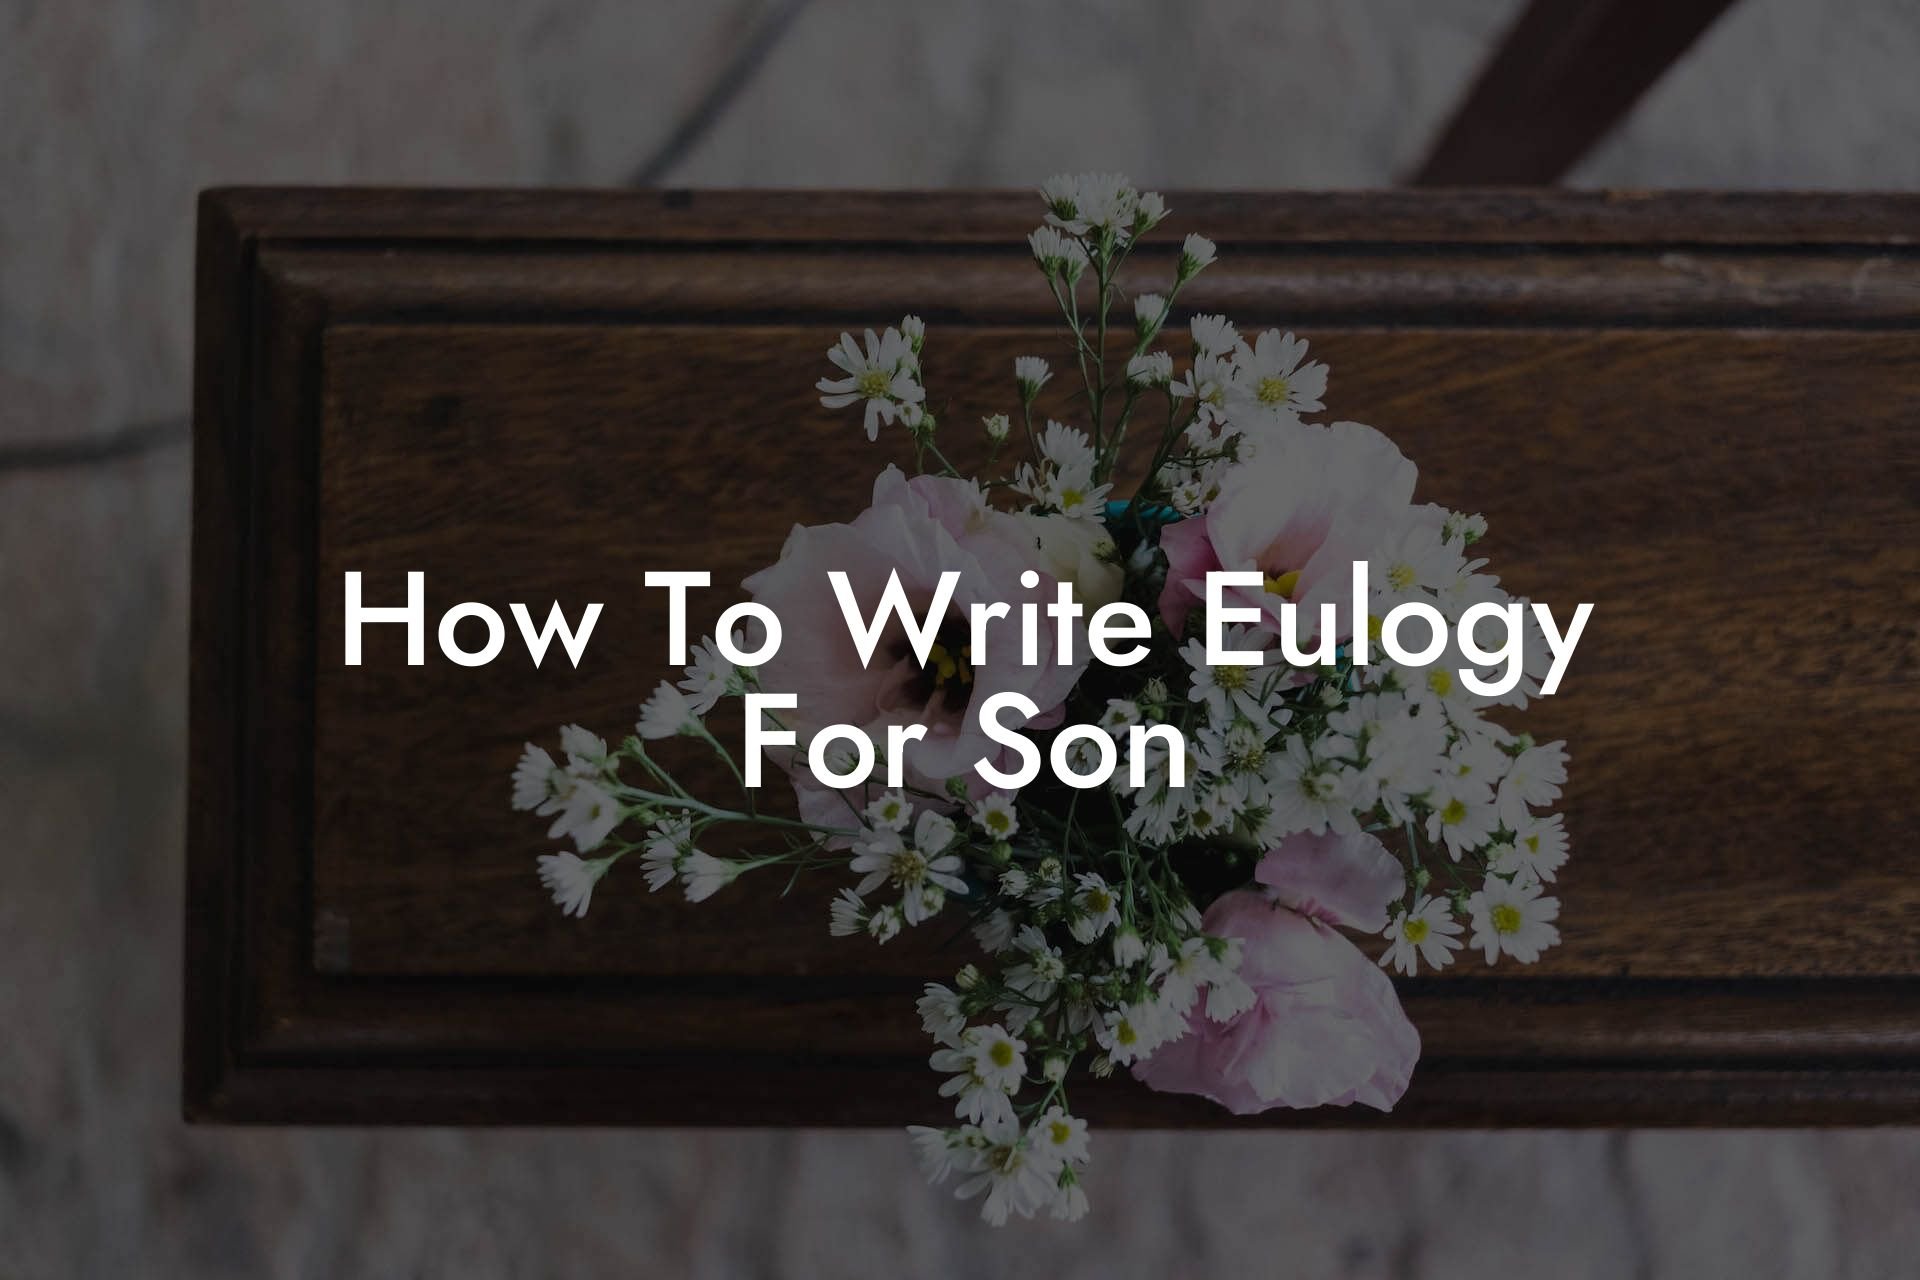 How To Write Eulogy For Son